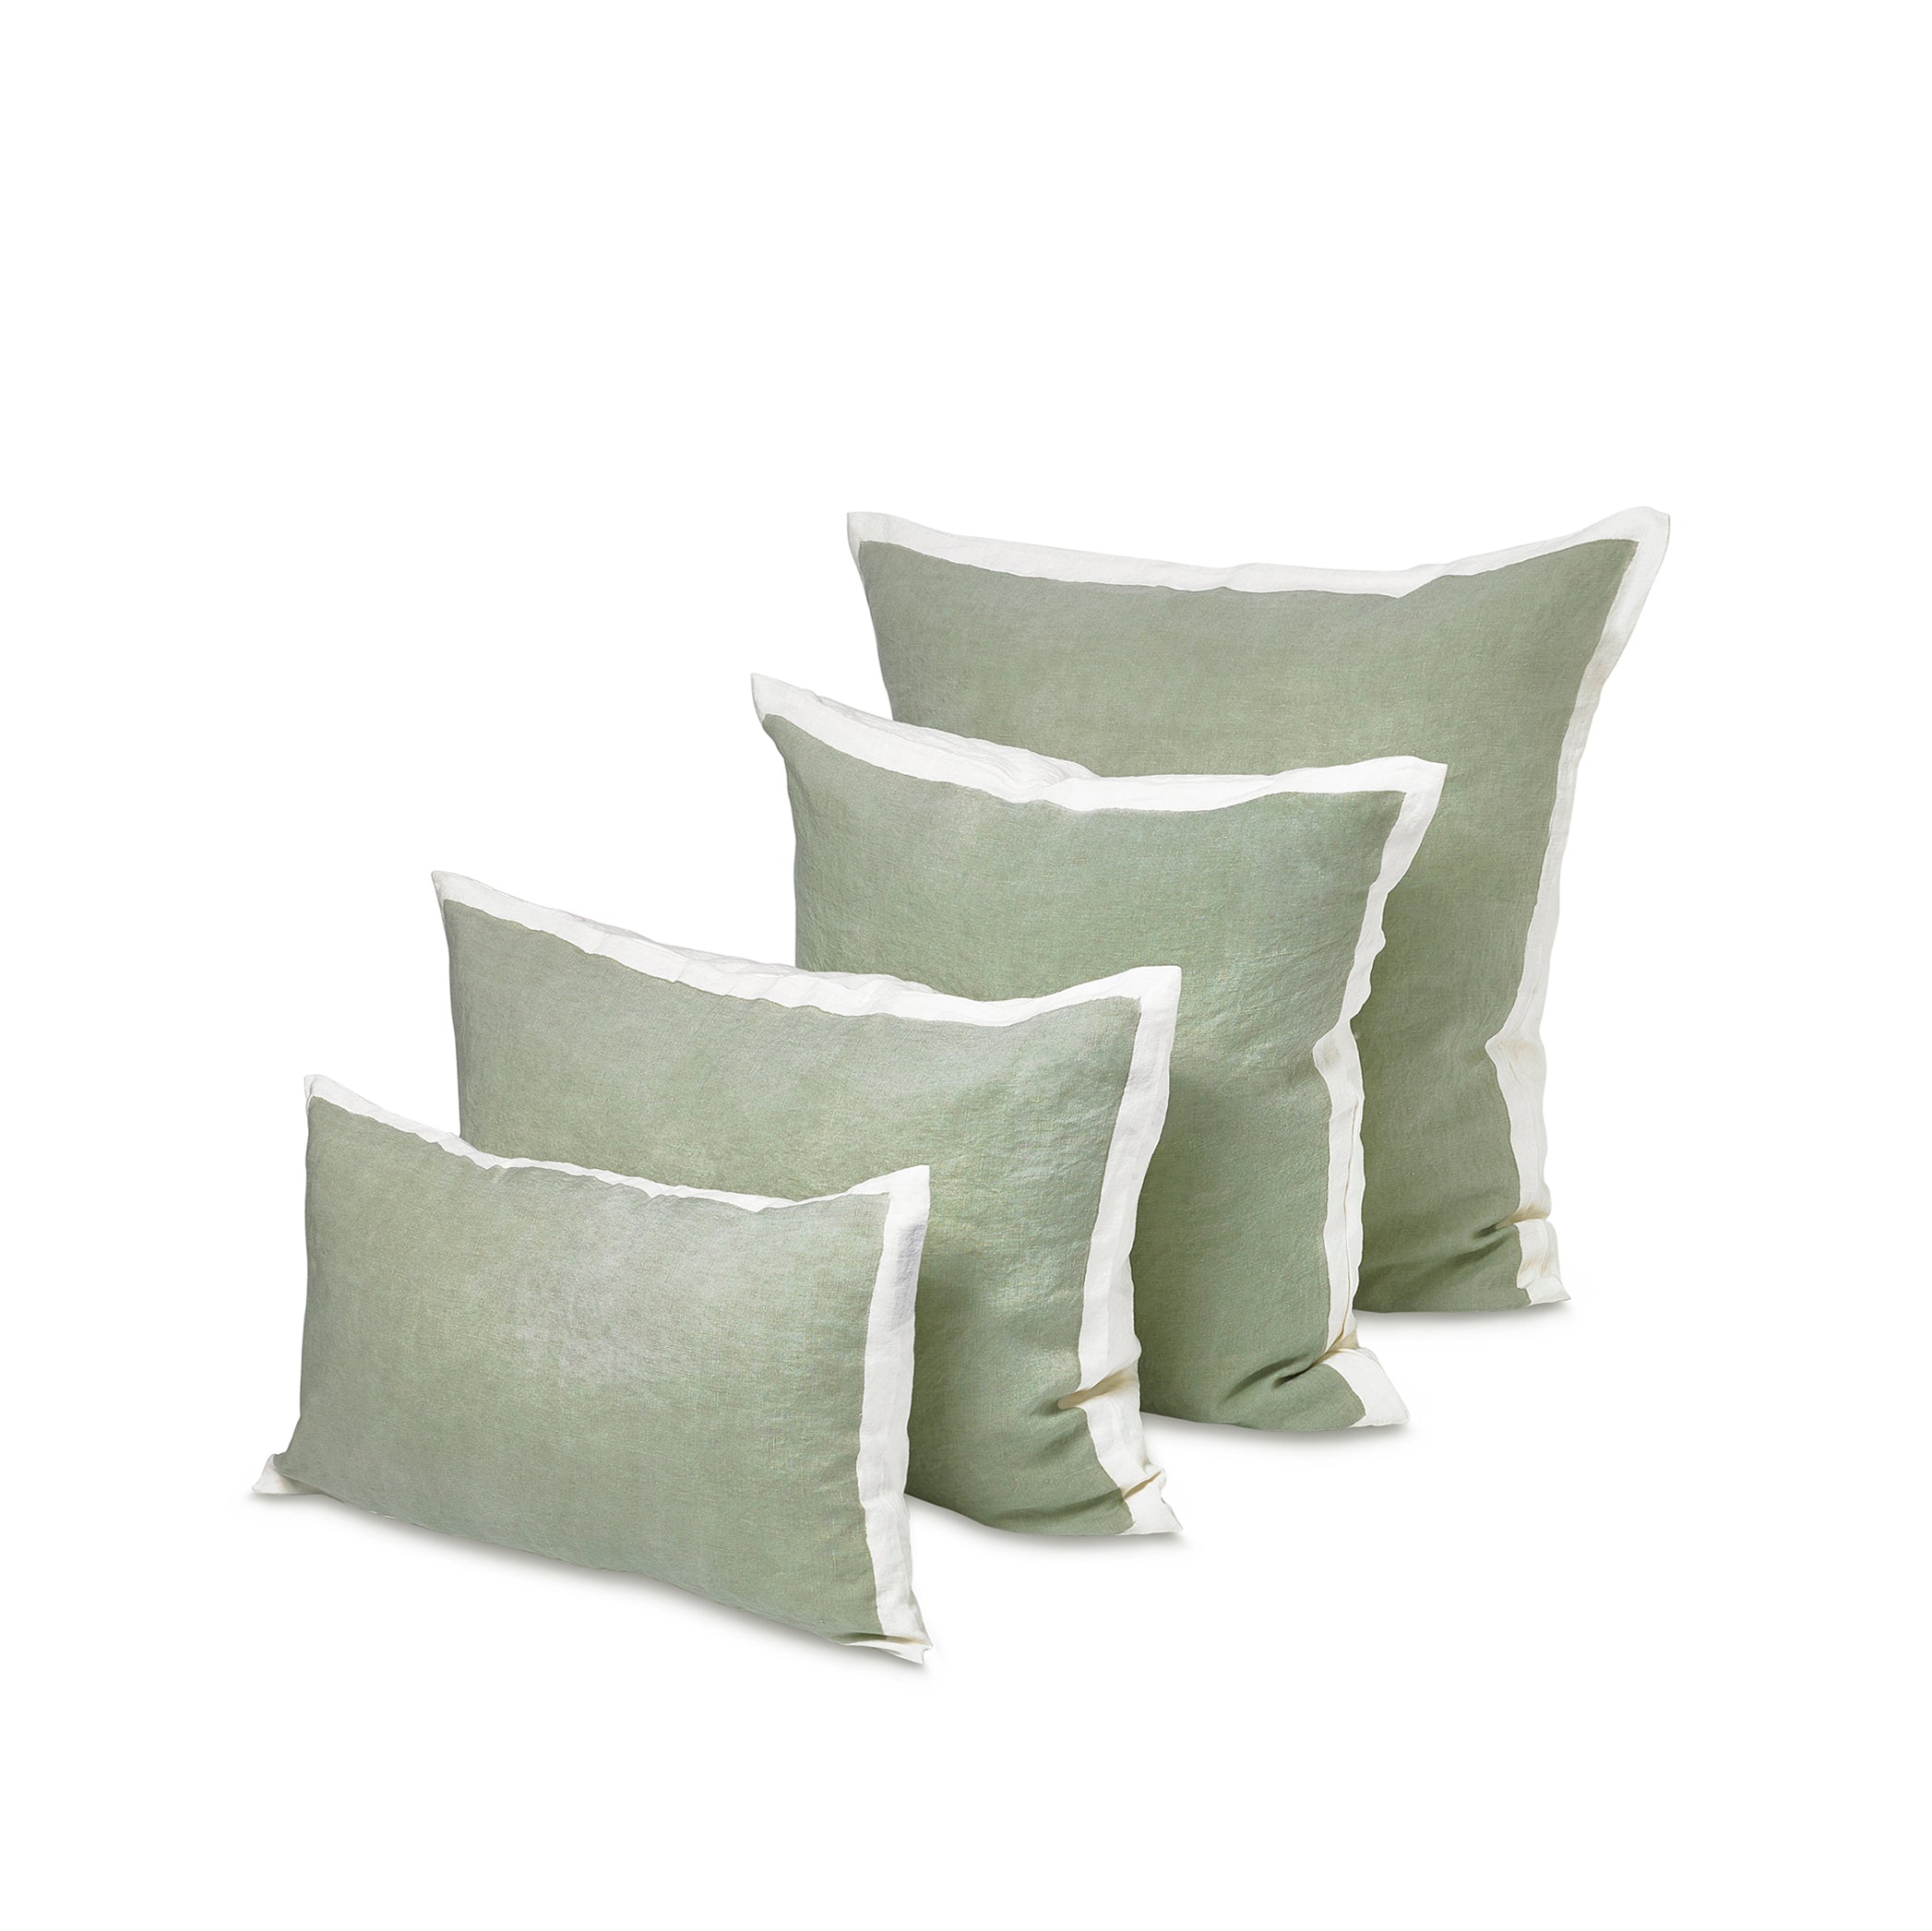 Hand Painted Linen Cushion in Pale Green, 60cm x 60cm